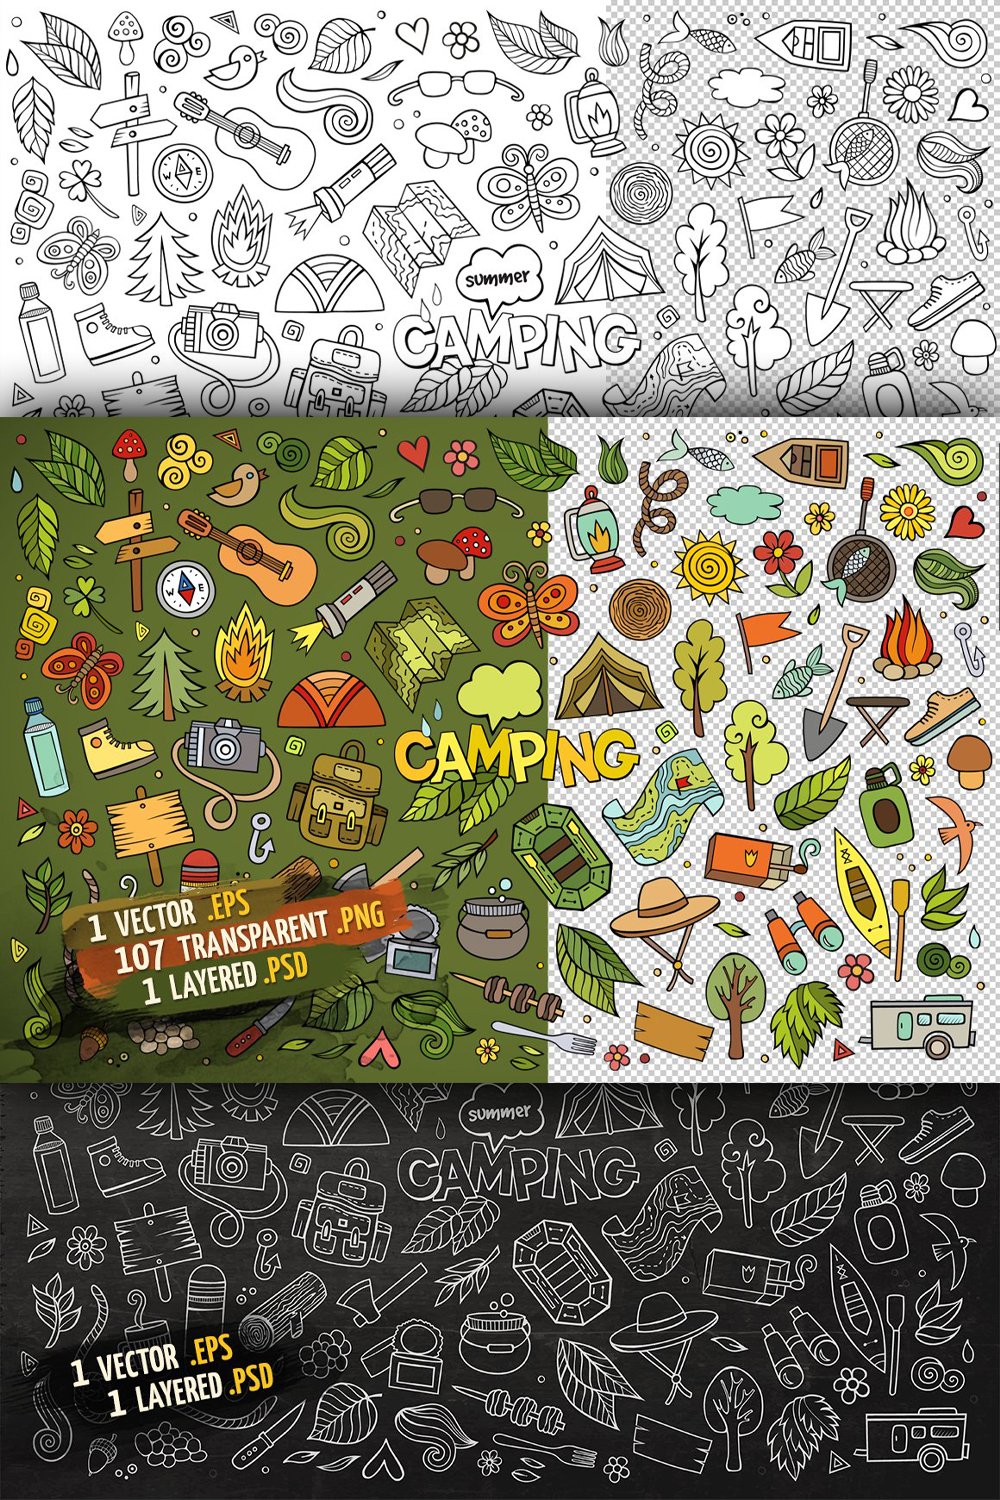 Camping objects elements of pinterest.